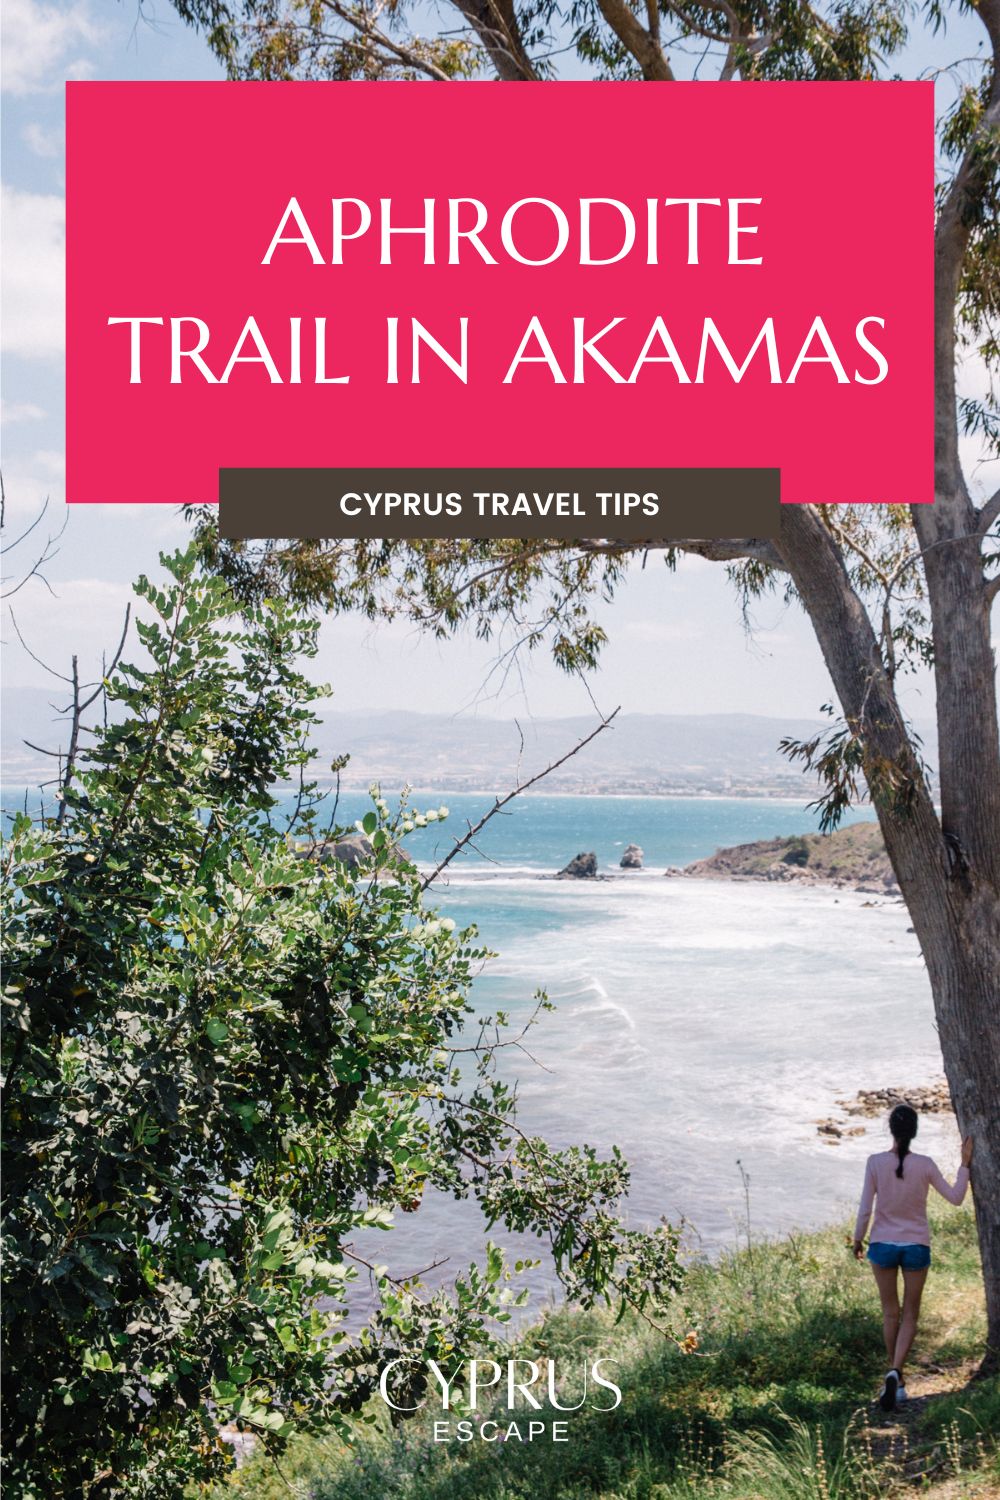 Pinterest Image For An Article About Hiking Aphrodite Trail in Akamas